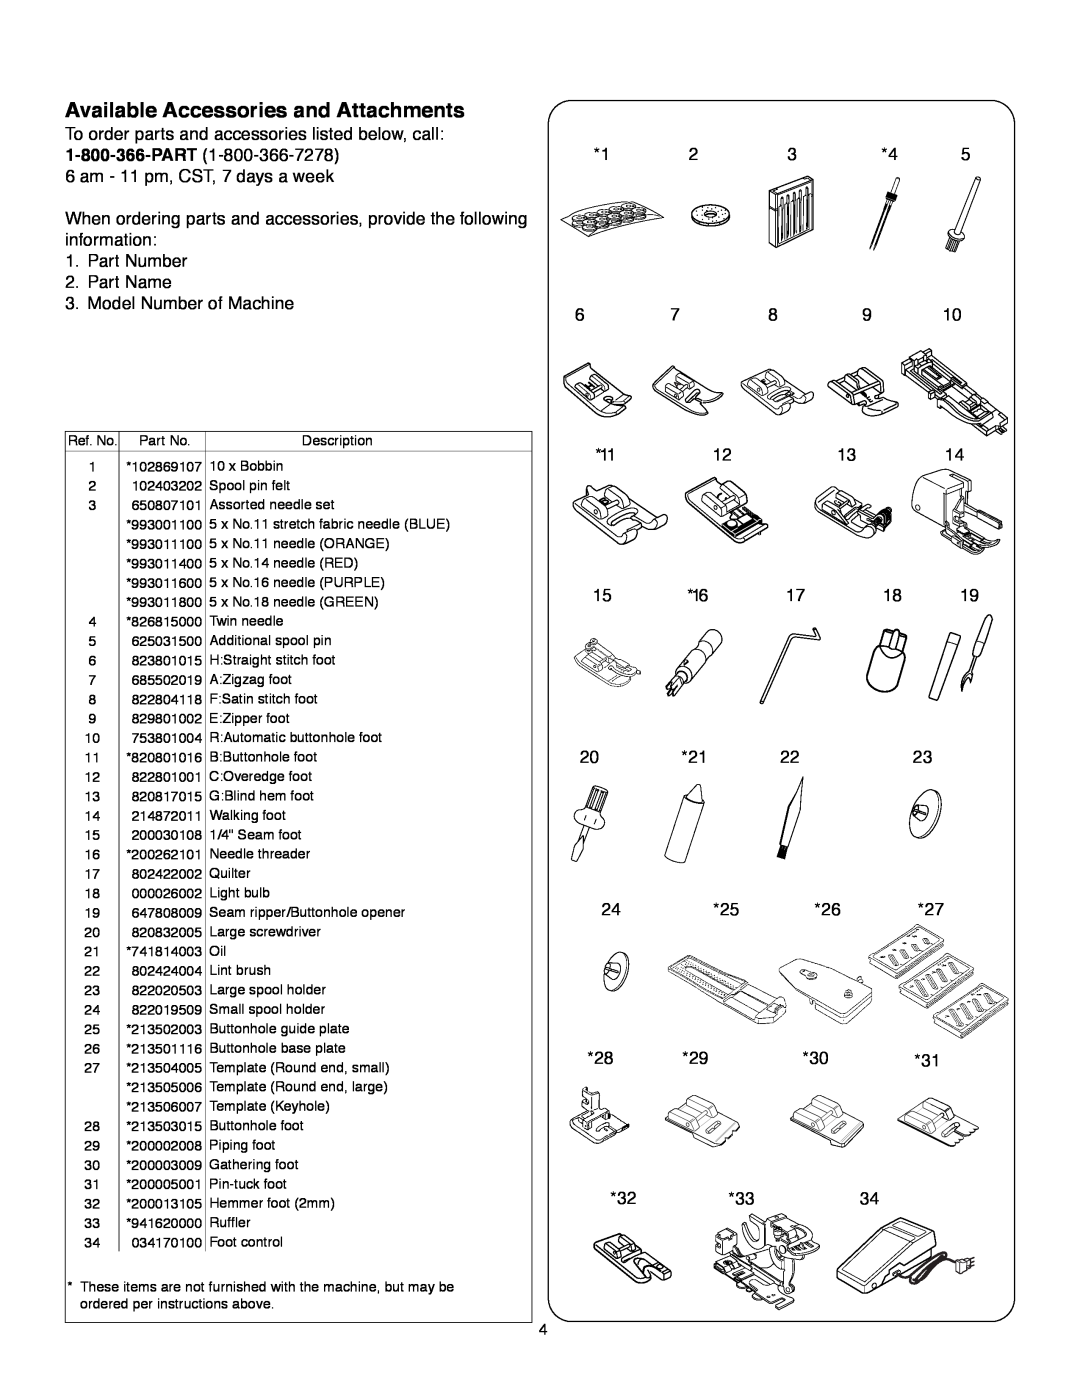 Janome MS-5027 Available Accessories and Attachments, To order parts and accessories listed below, call 1-800-366-PART 